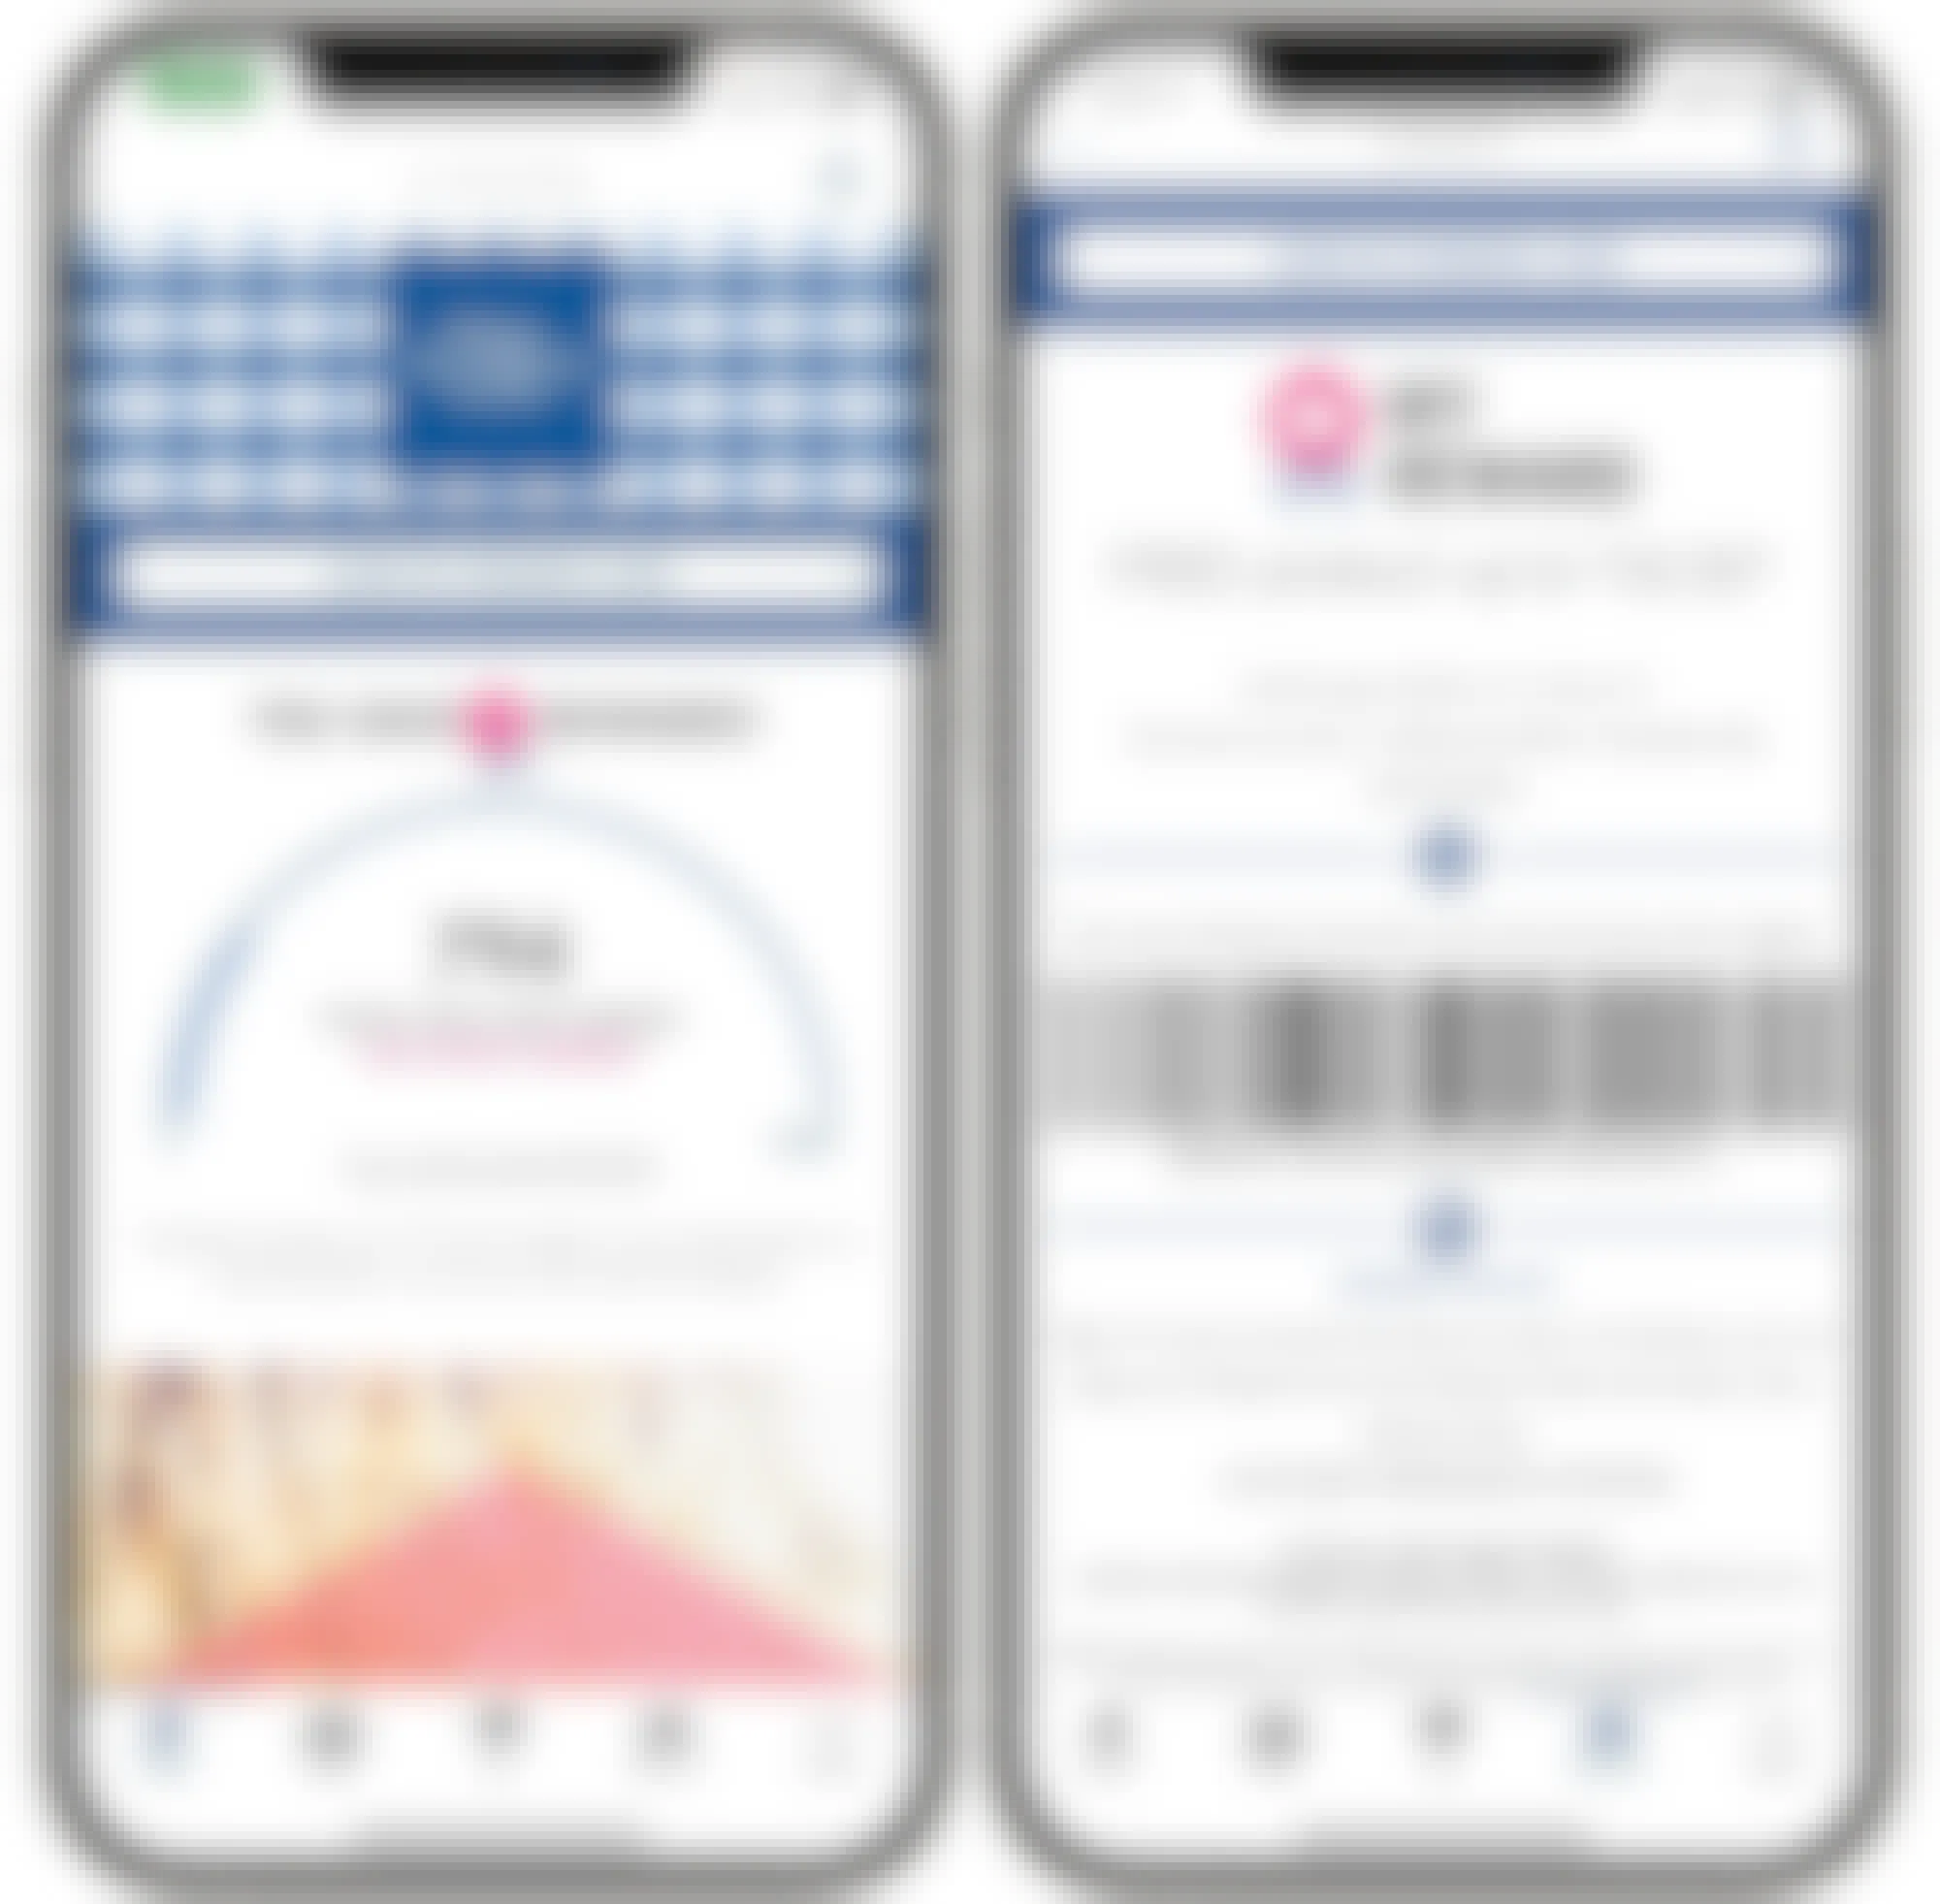 Two app screens display a persons Bath & Body Works reward balance and a coupon on their My rewards account.